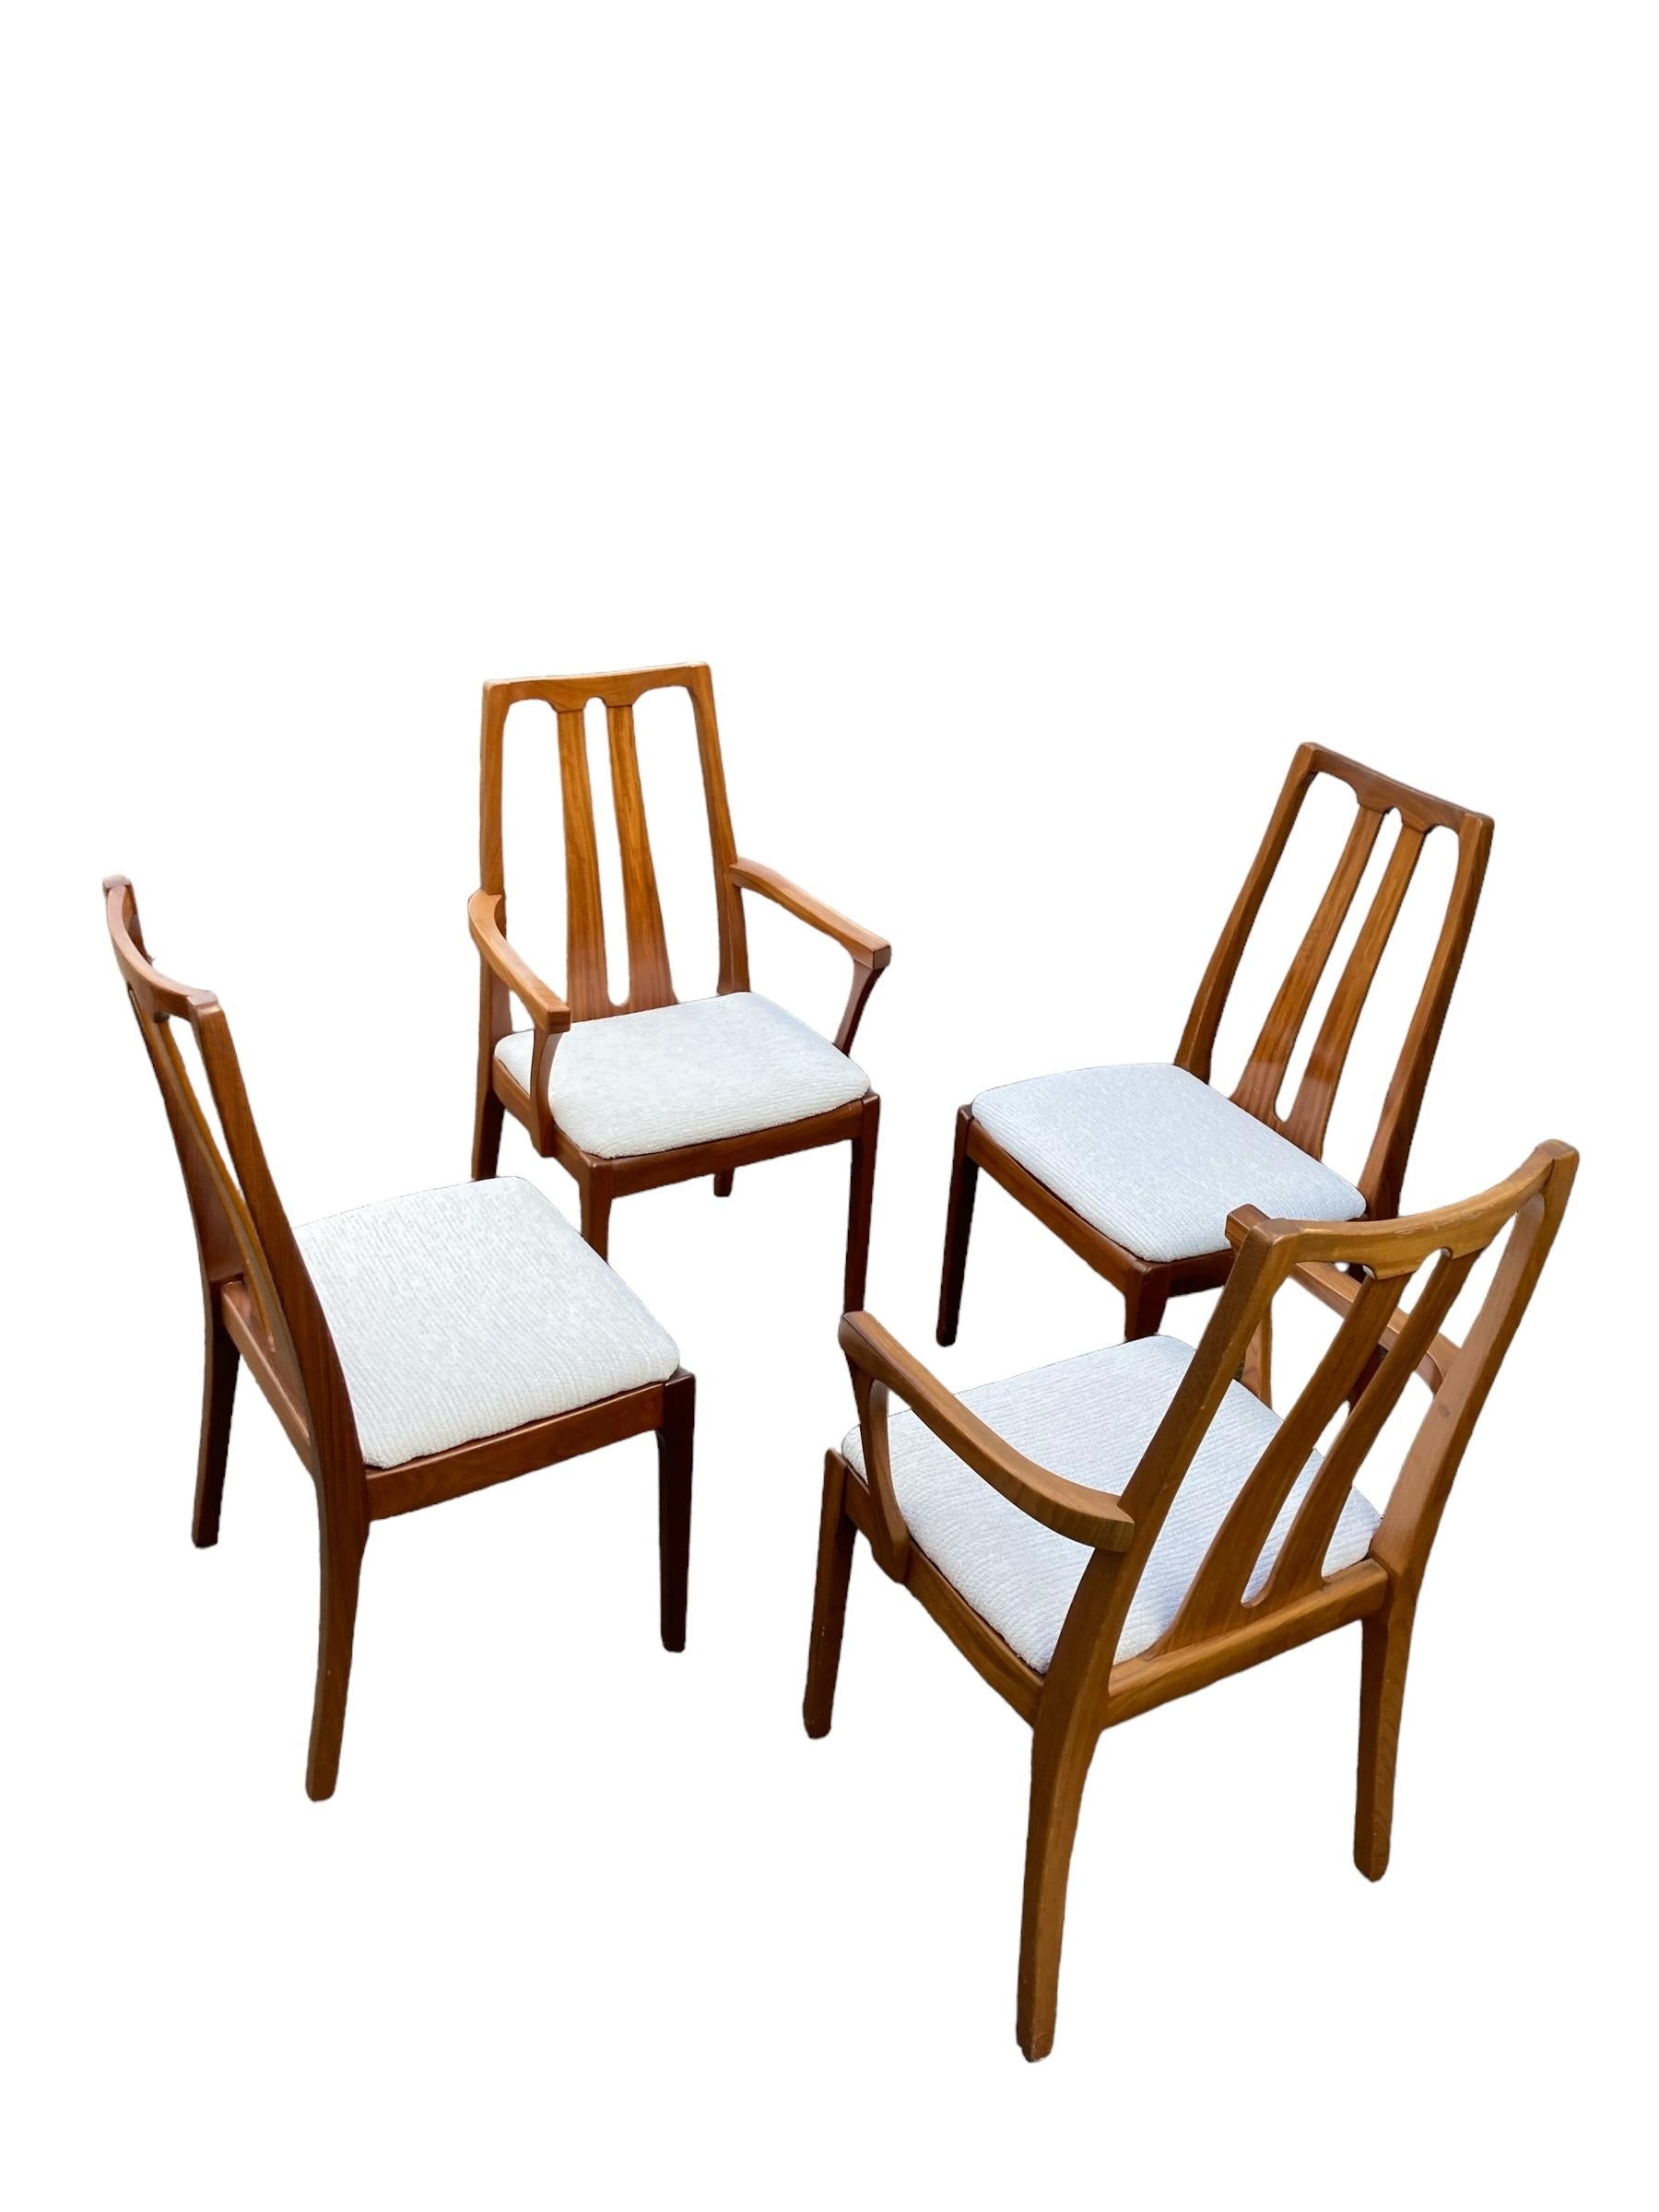 Set of For Mid Century Teak Nathan Dining Chairs. Reupholstered in a contrasting Cream Boucle style upholstery.
H: 96 cm
Seat Height: 46 cm
Arm Width: 54 cm
W: 48 cm
D: 43 cm
Arm Height: 65 cm